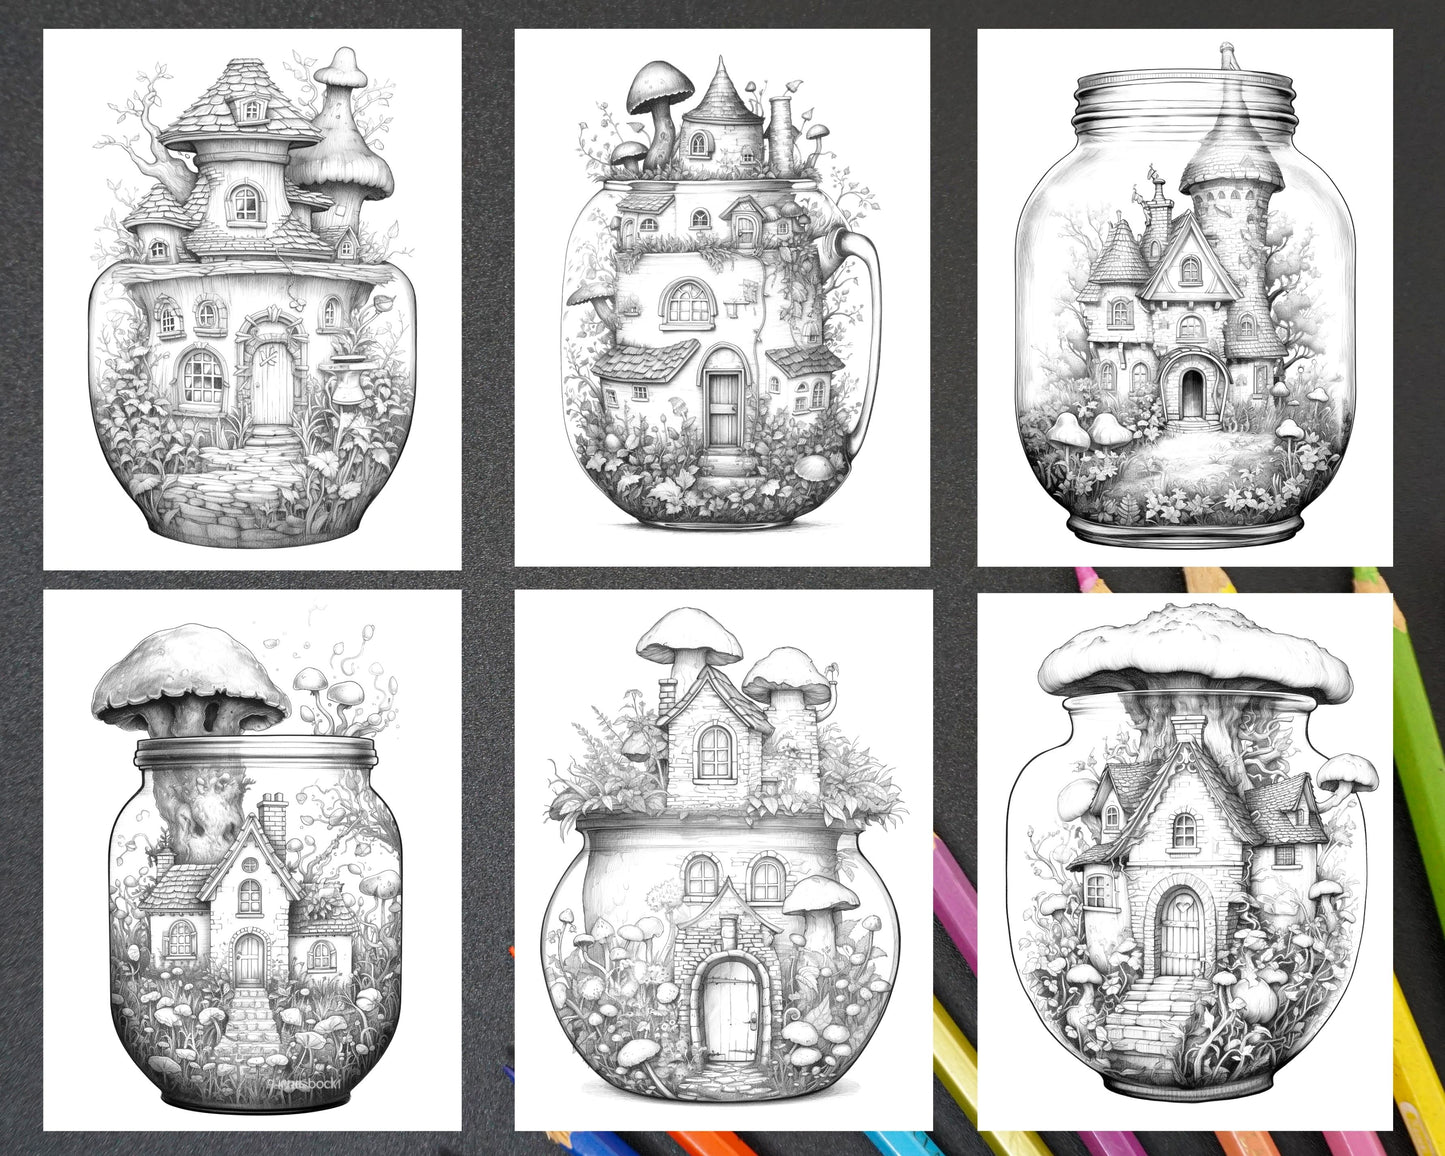 Fairy House in Jar Grayscale Coloring Pages Printable, Adult Coloring Activity, Black and White Coloring Sheets, Intricate Line Art, Fairy Garden Illustrations